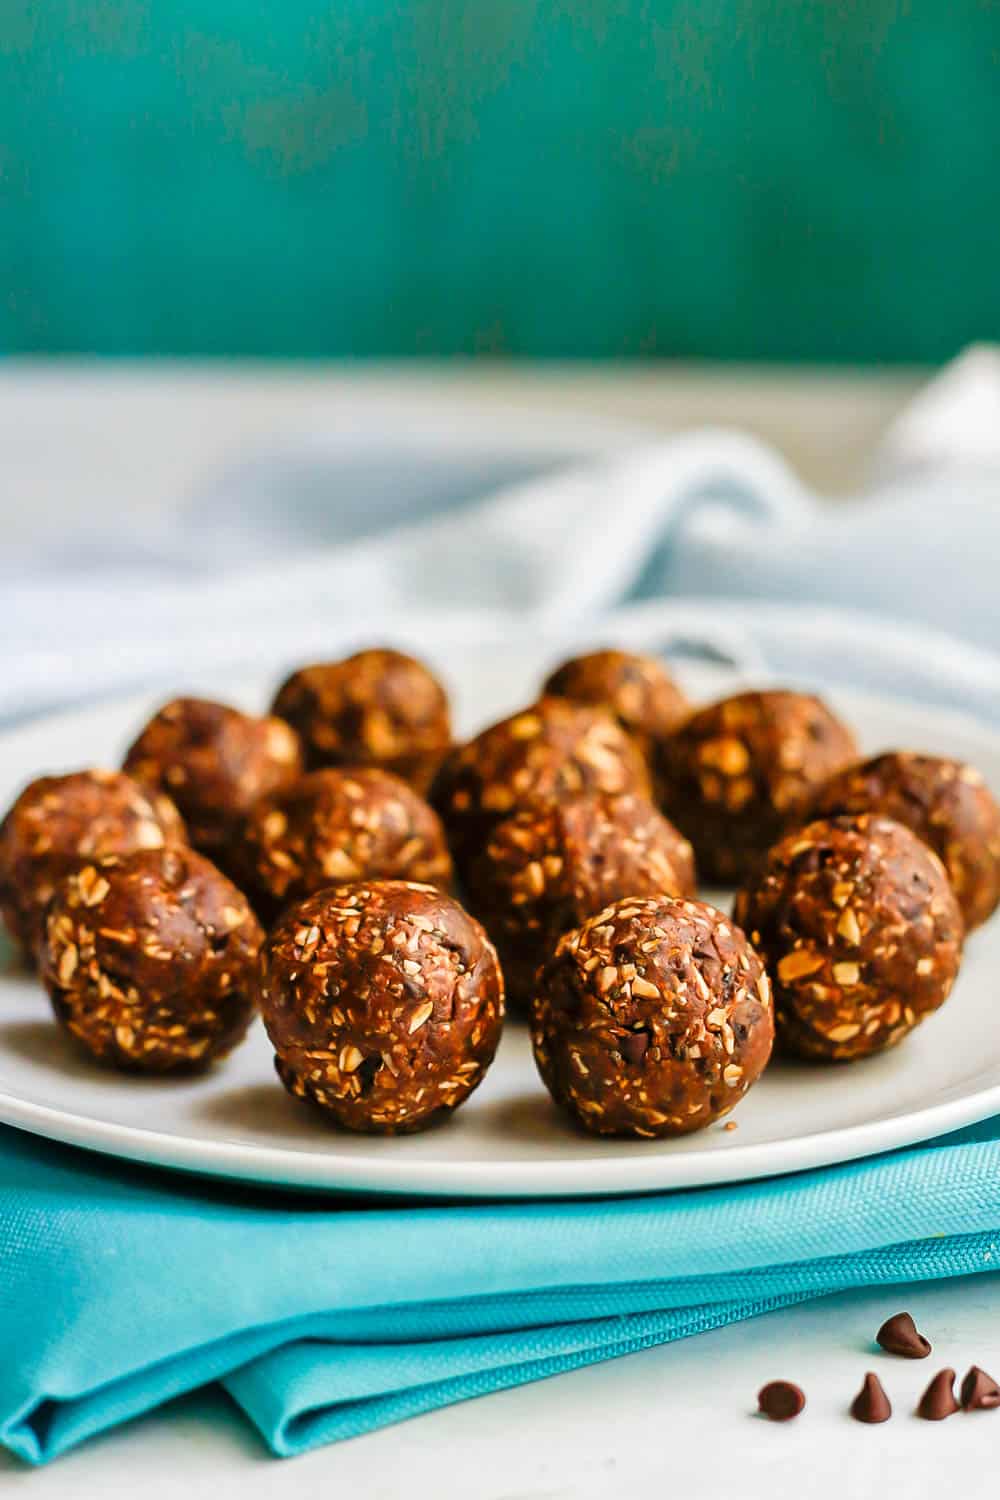 A white plate with chocolate peanut butter energy balls set on teal napkins